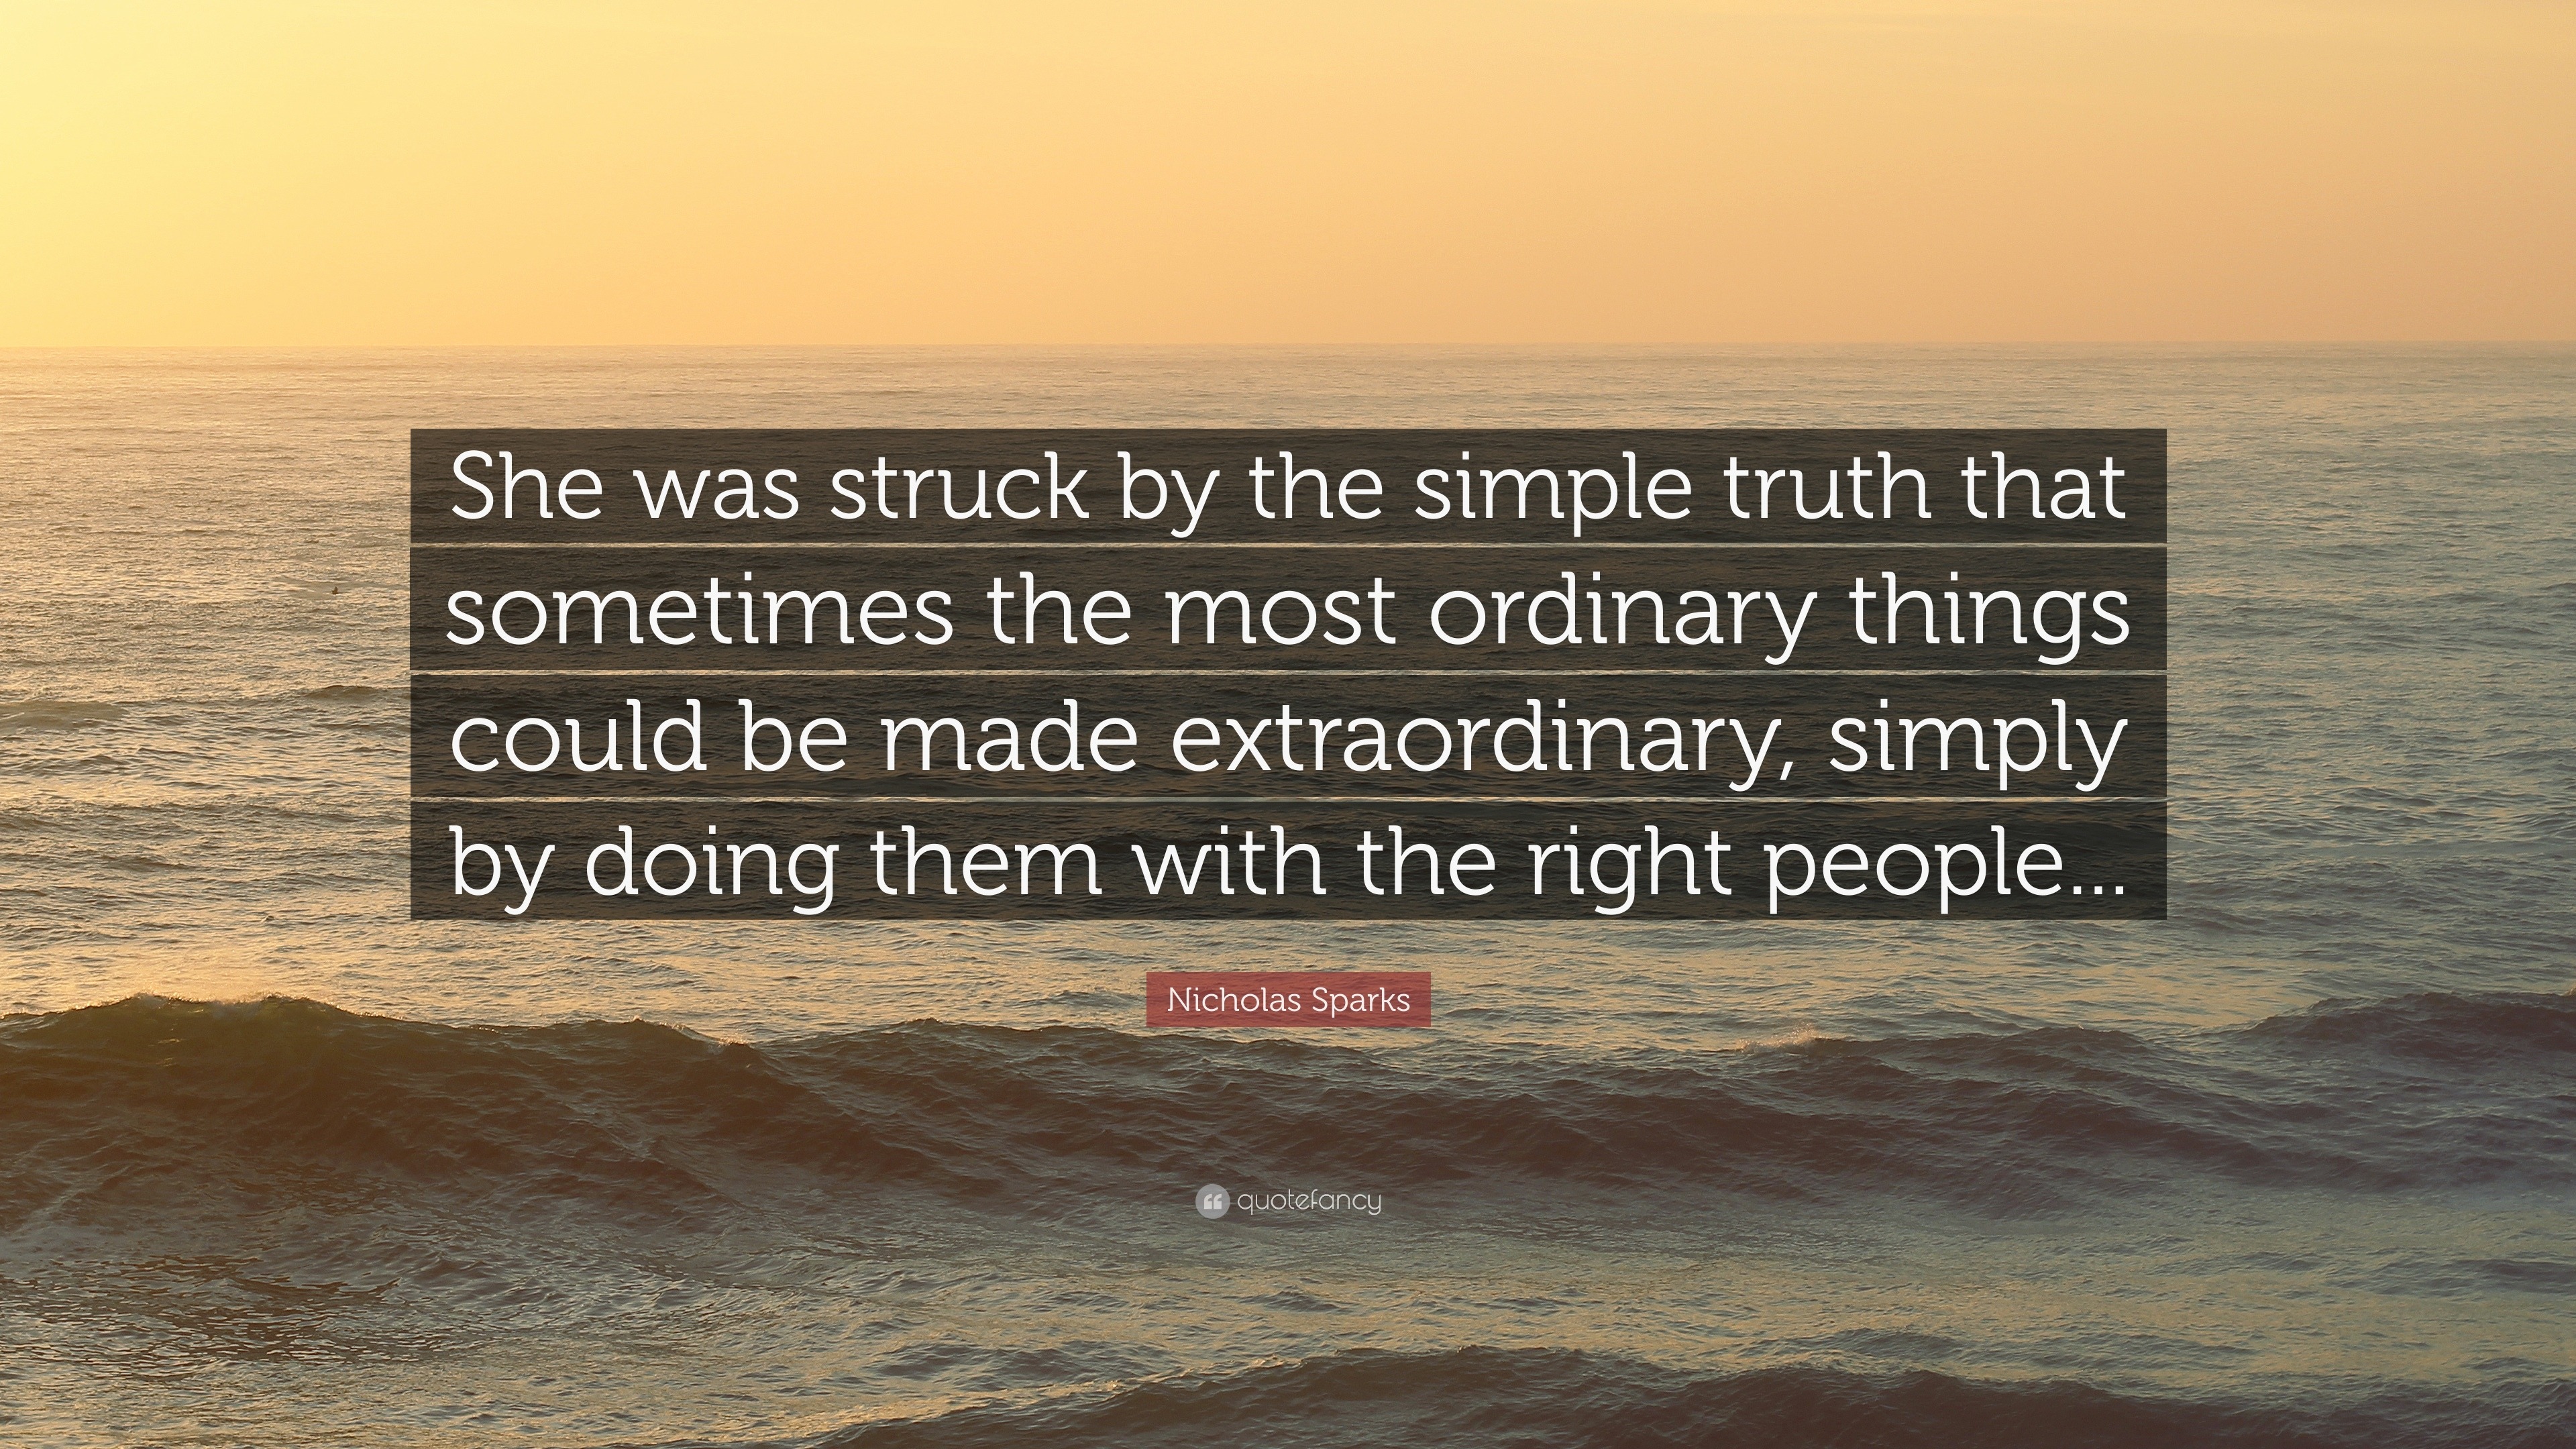 Nicholas Sparks Quote: “She was struck by the simple truth that ...